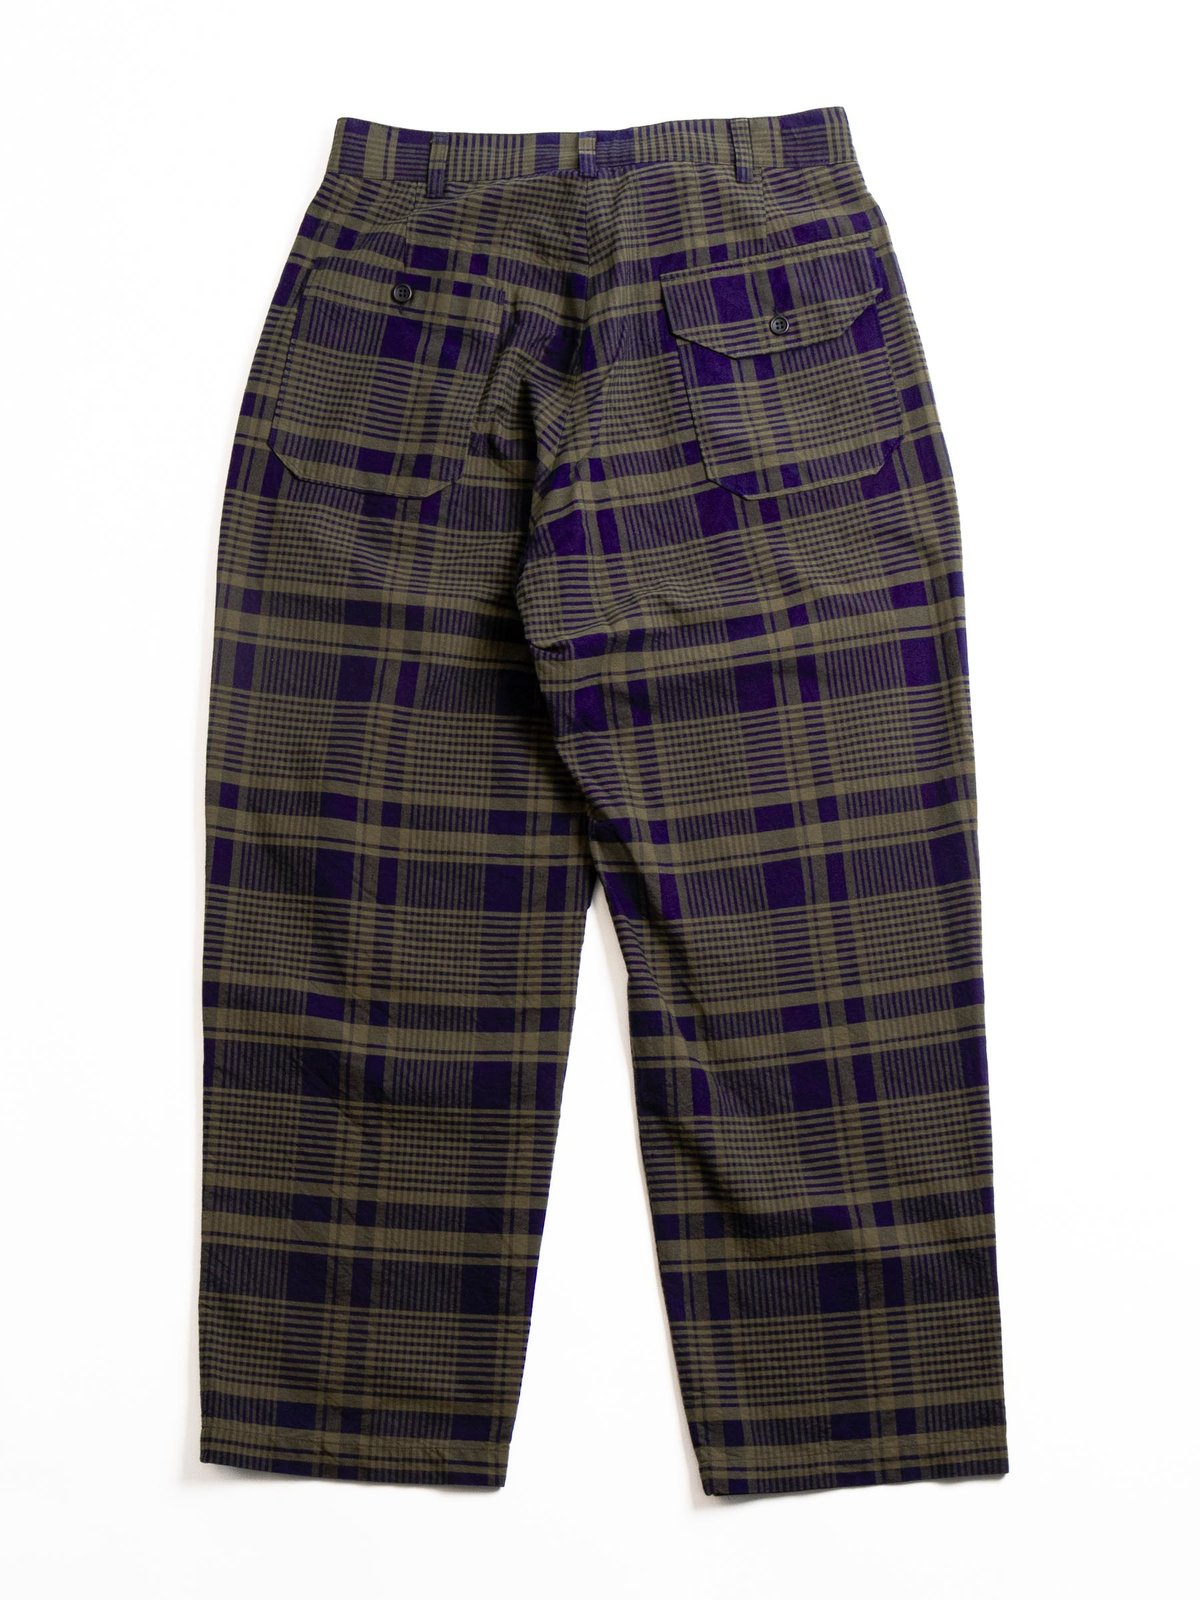 CARLYLE PANT NAVY/OLIVE COTTON PLAID - Image 6